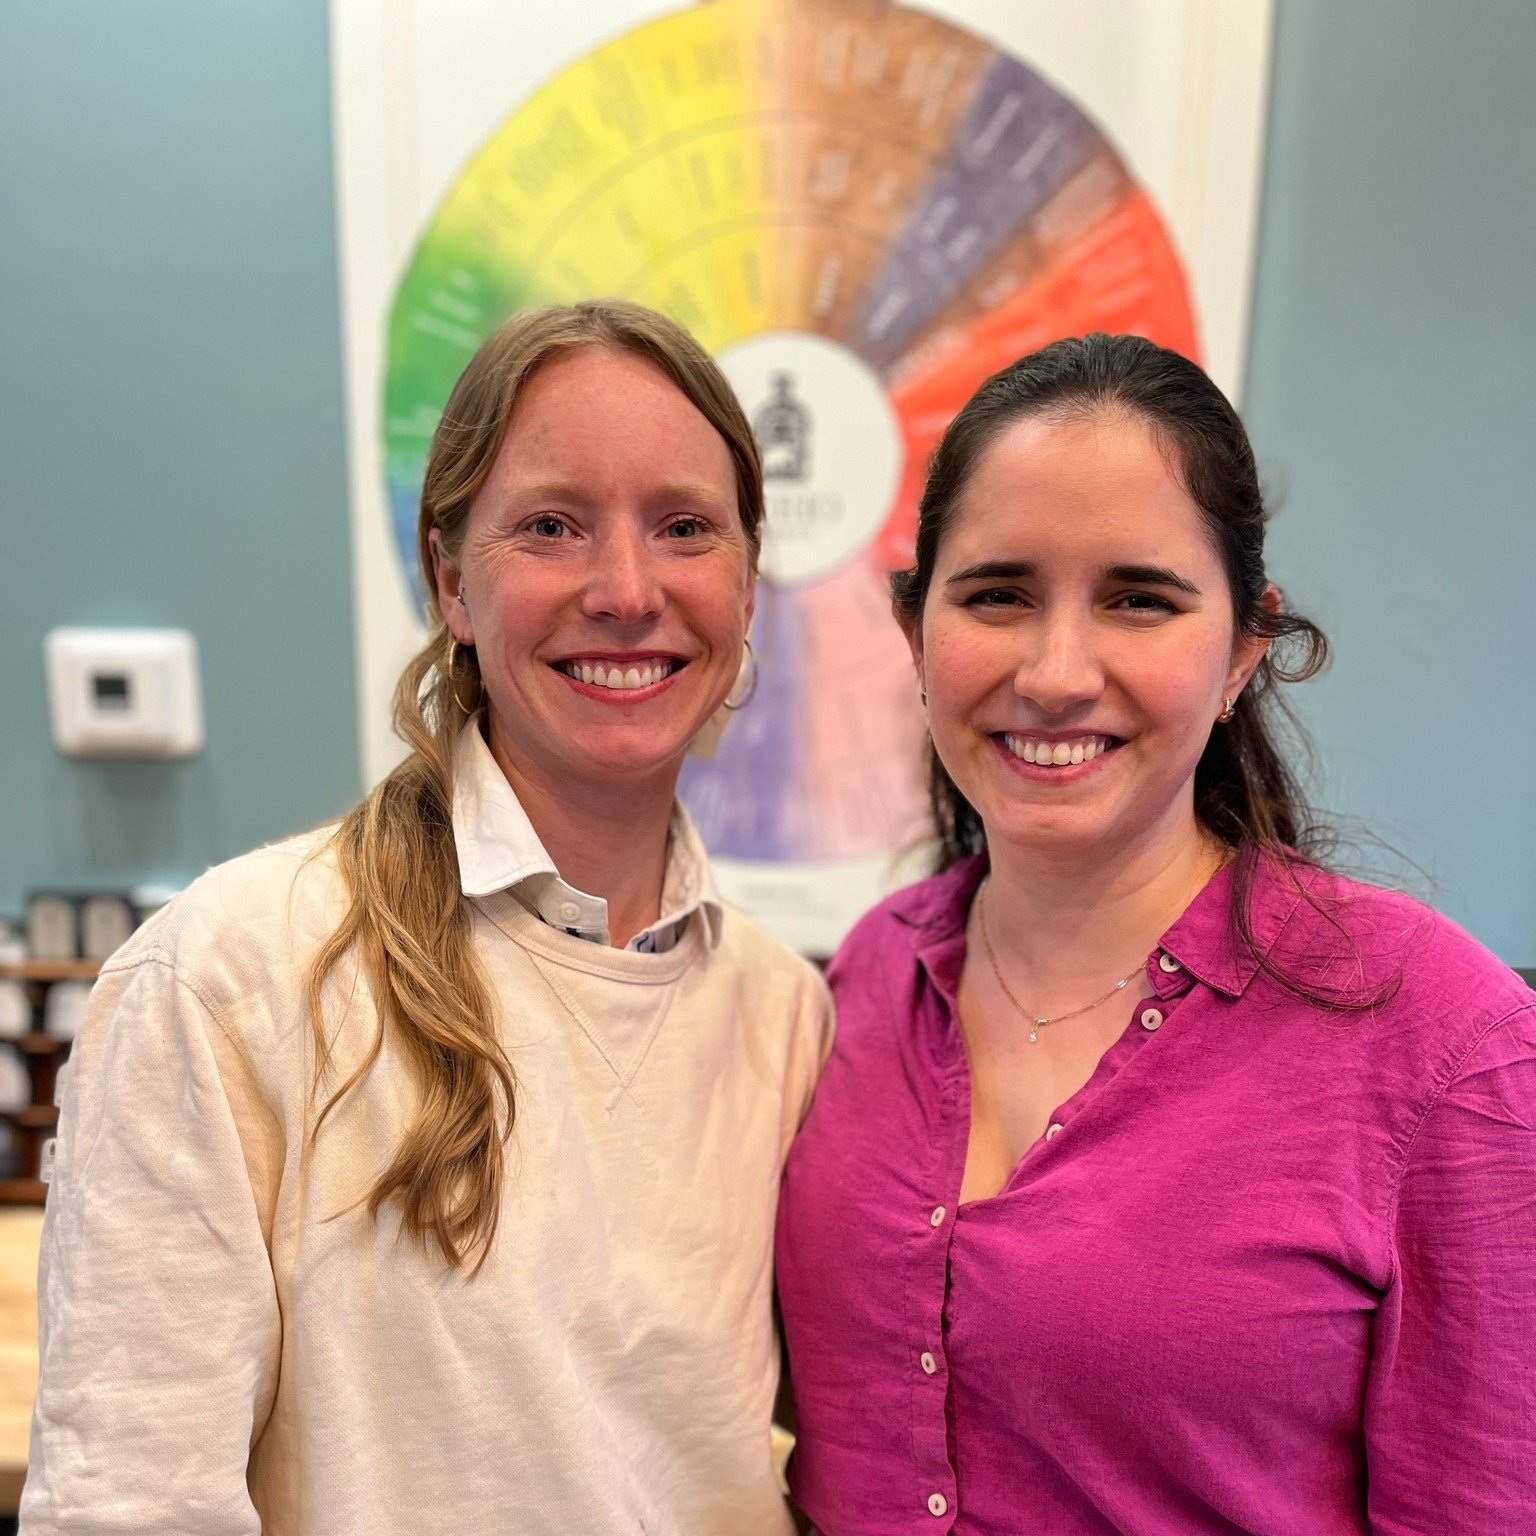 Huge shoutout and thank you to @curiospice and everyone who came to our Fireside Chat last night in Cambridge! We were honored to speak with Sage and the passionate community members about our energy resilience work and about making a difference in y